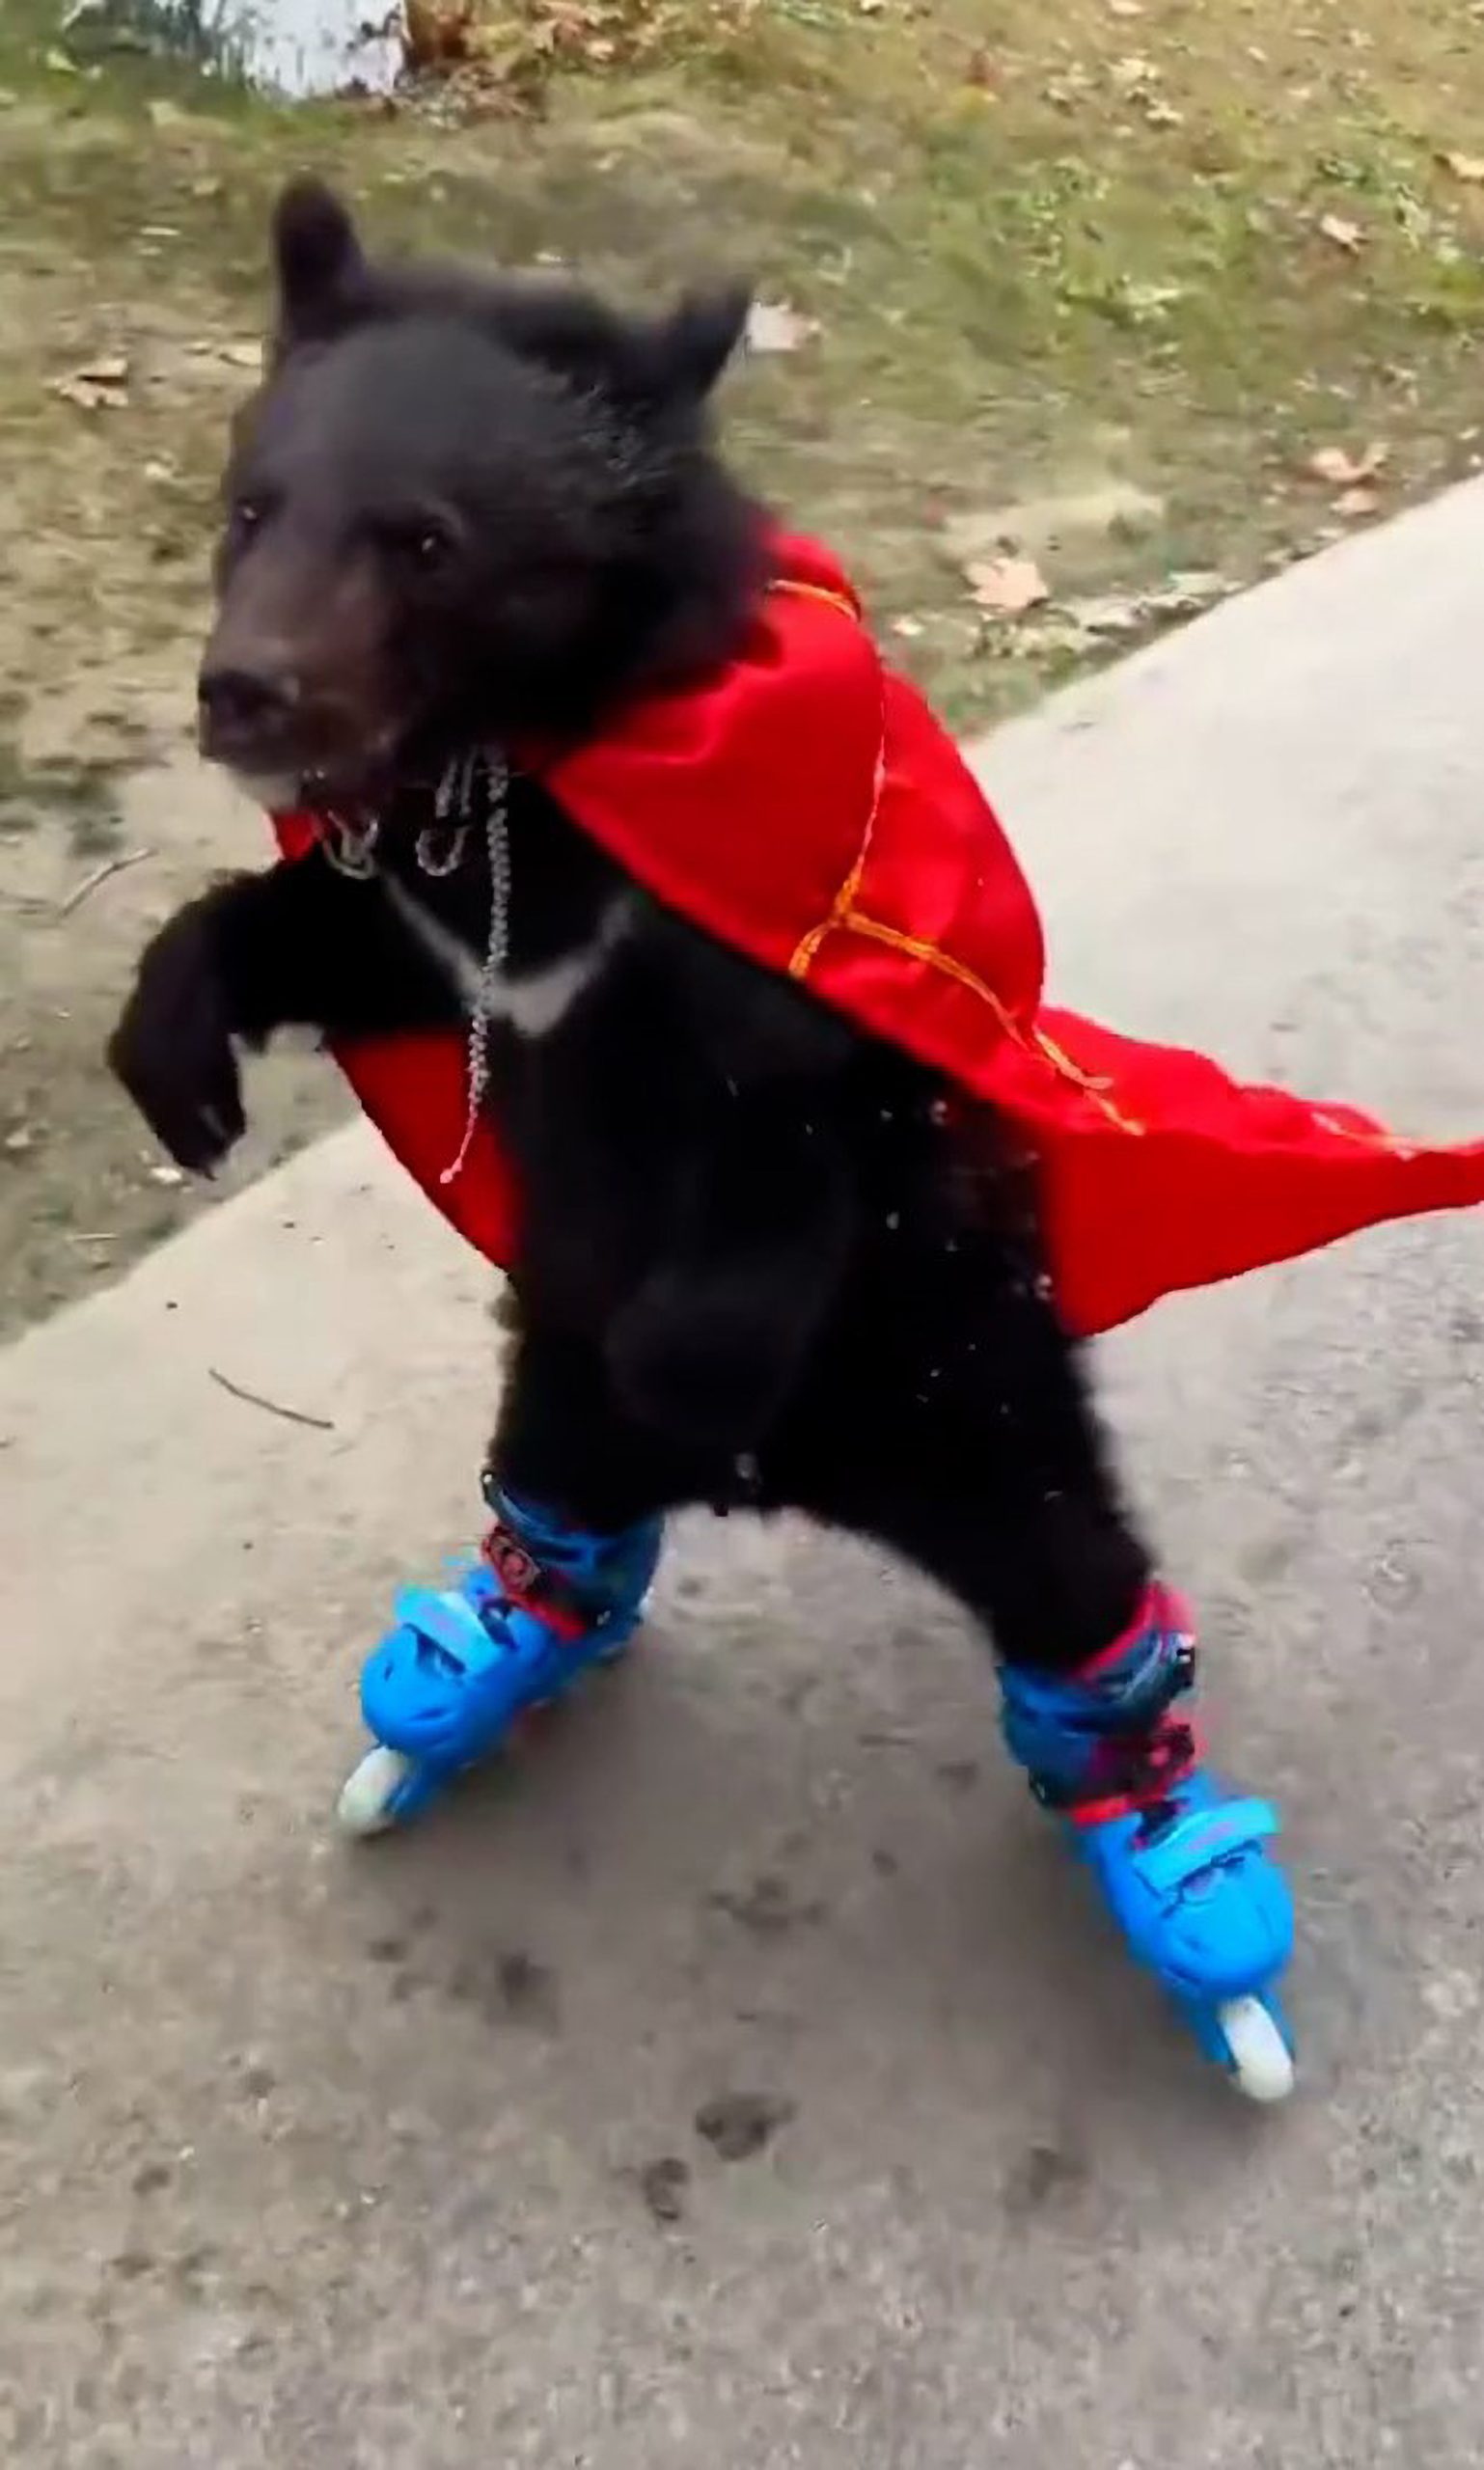 Read more about the article Moment Black Bear Cub Wearing Red Cape Rollerblades At Zoo In China